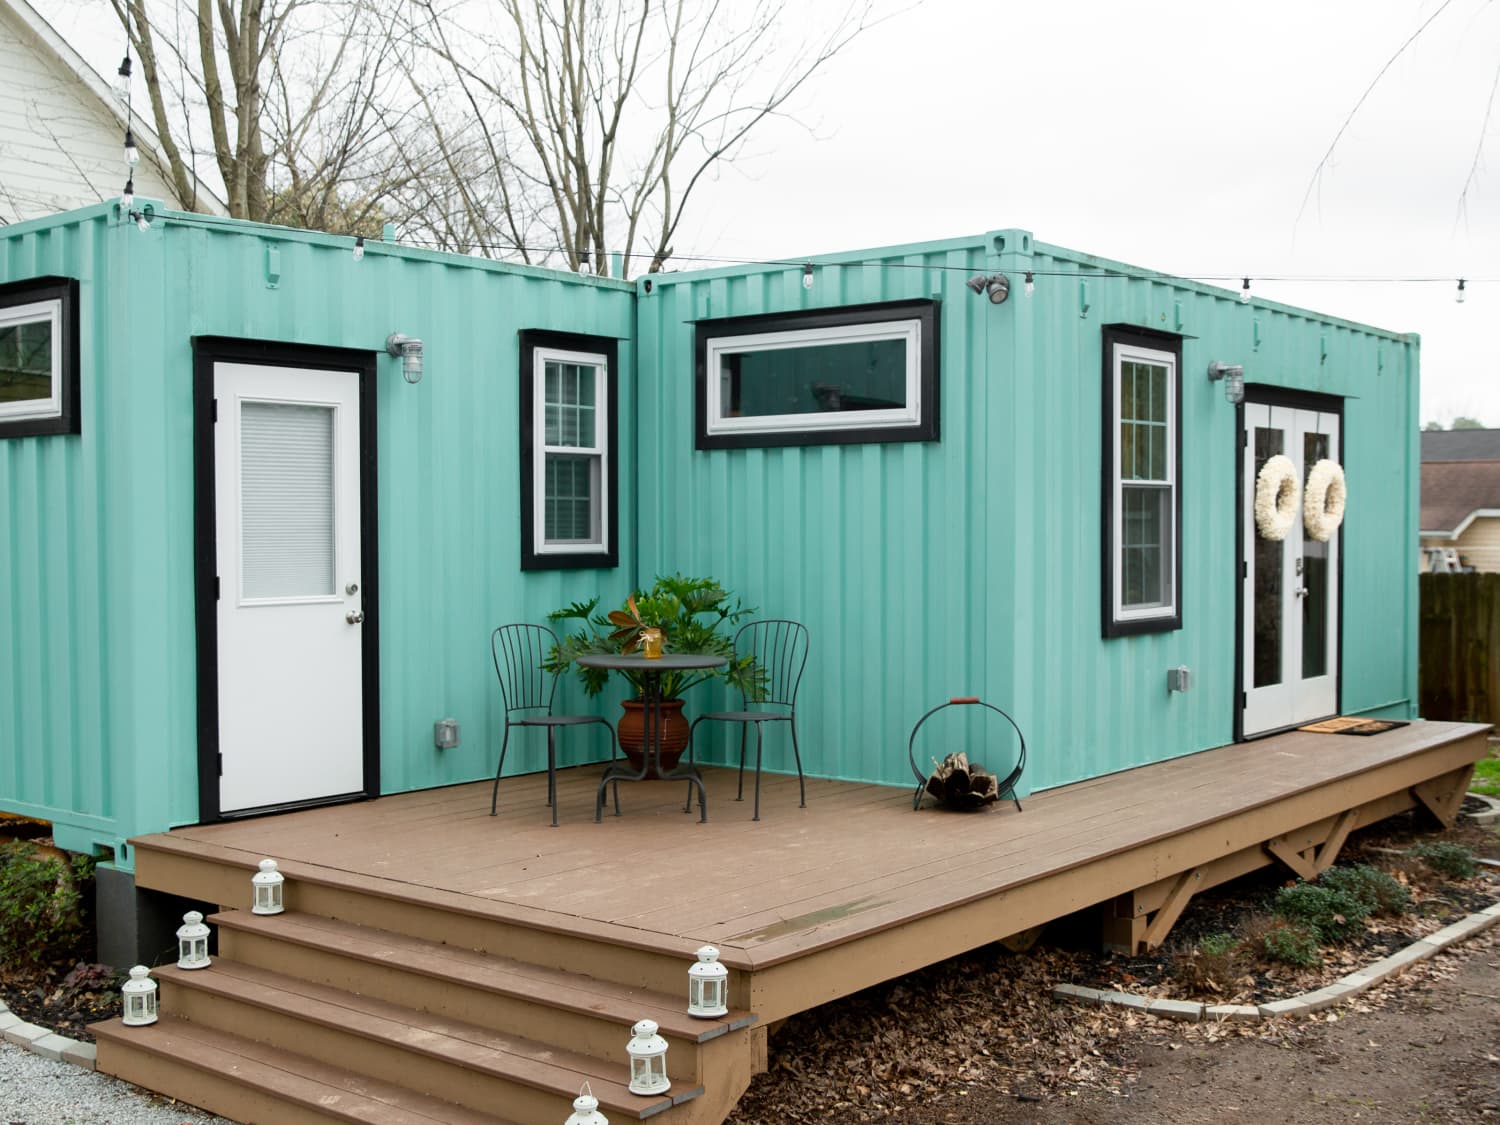 Shipping container buildings: Turning function into fashion